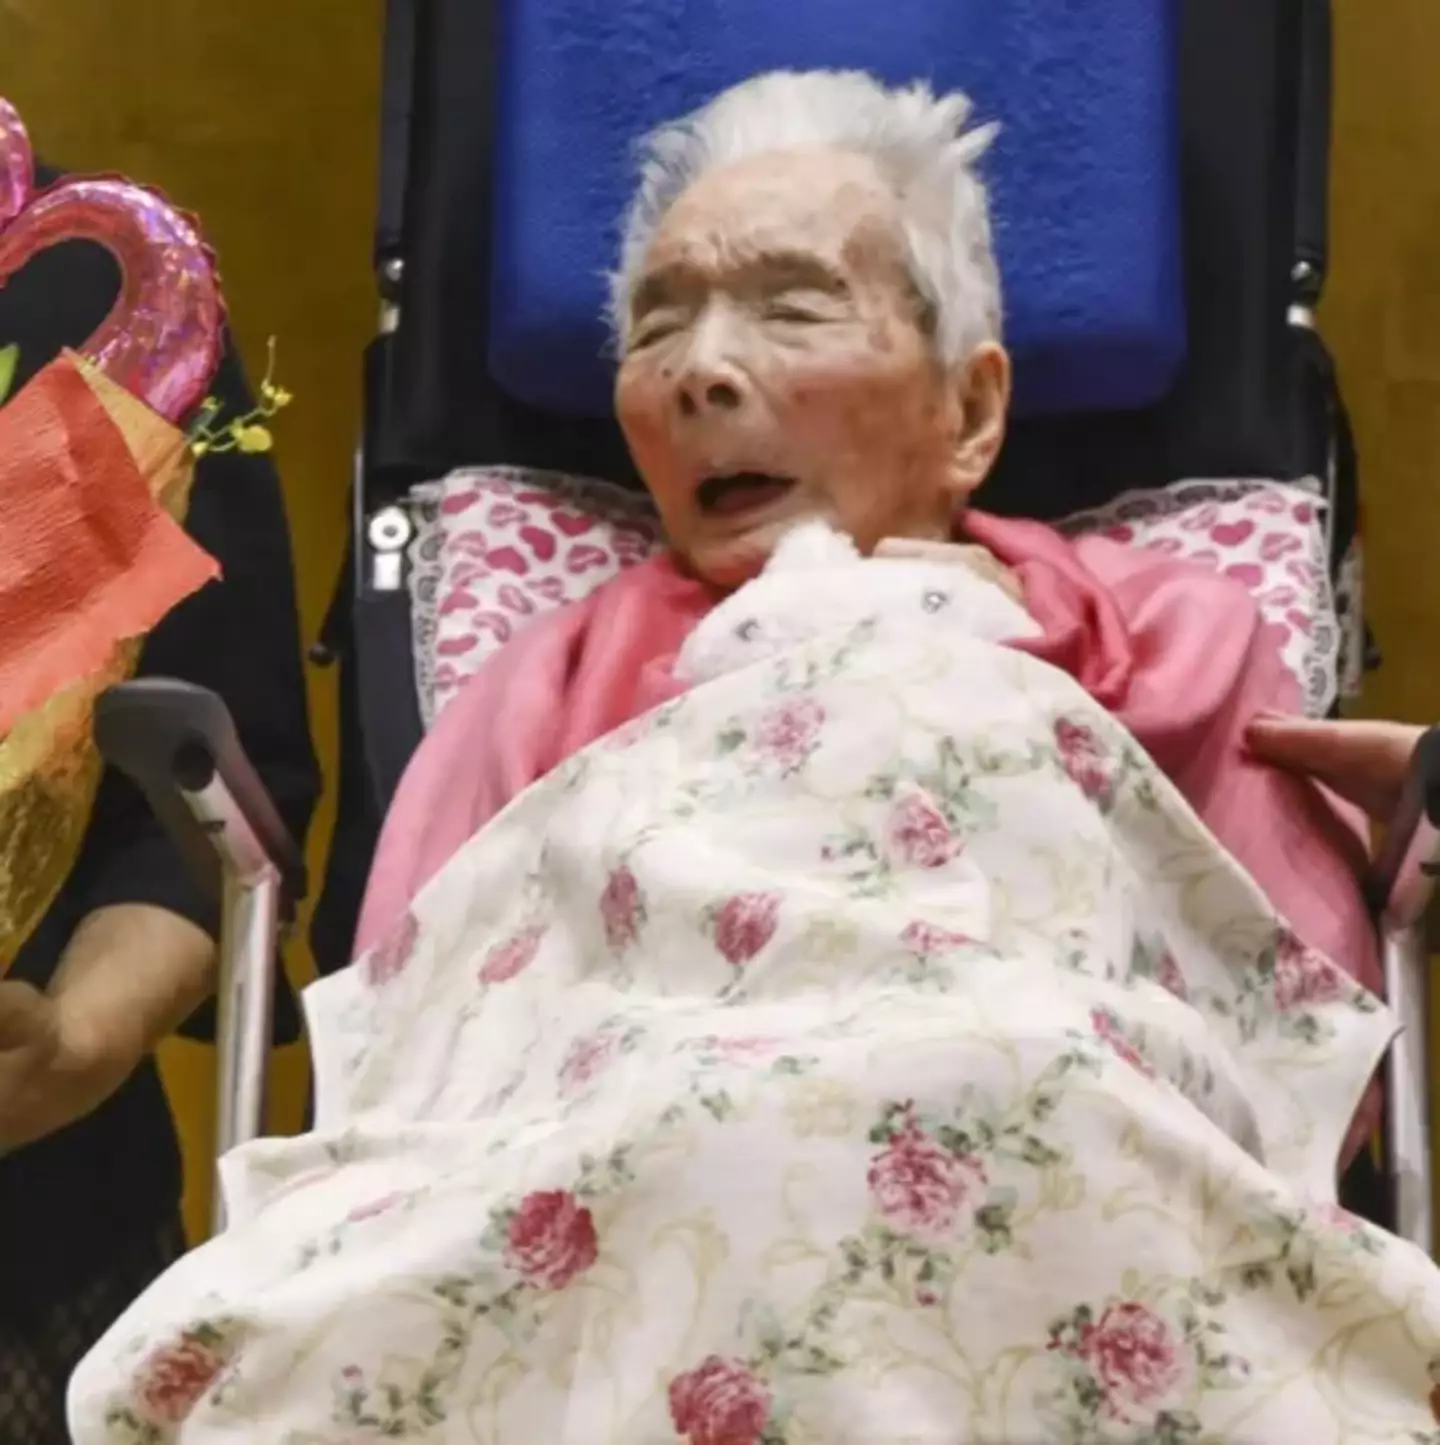 The 116-year-old passed away on 12 December.